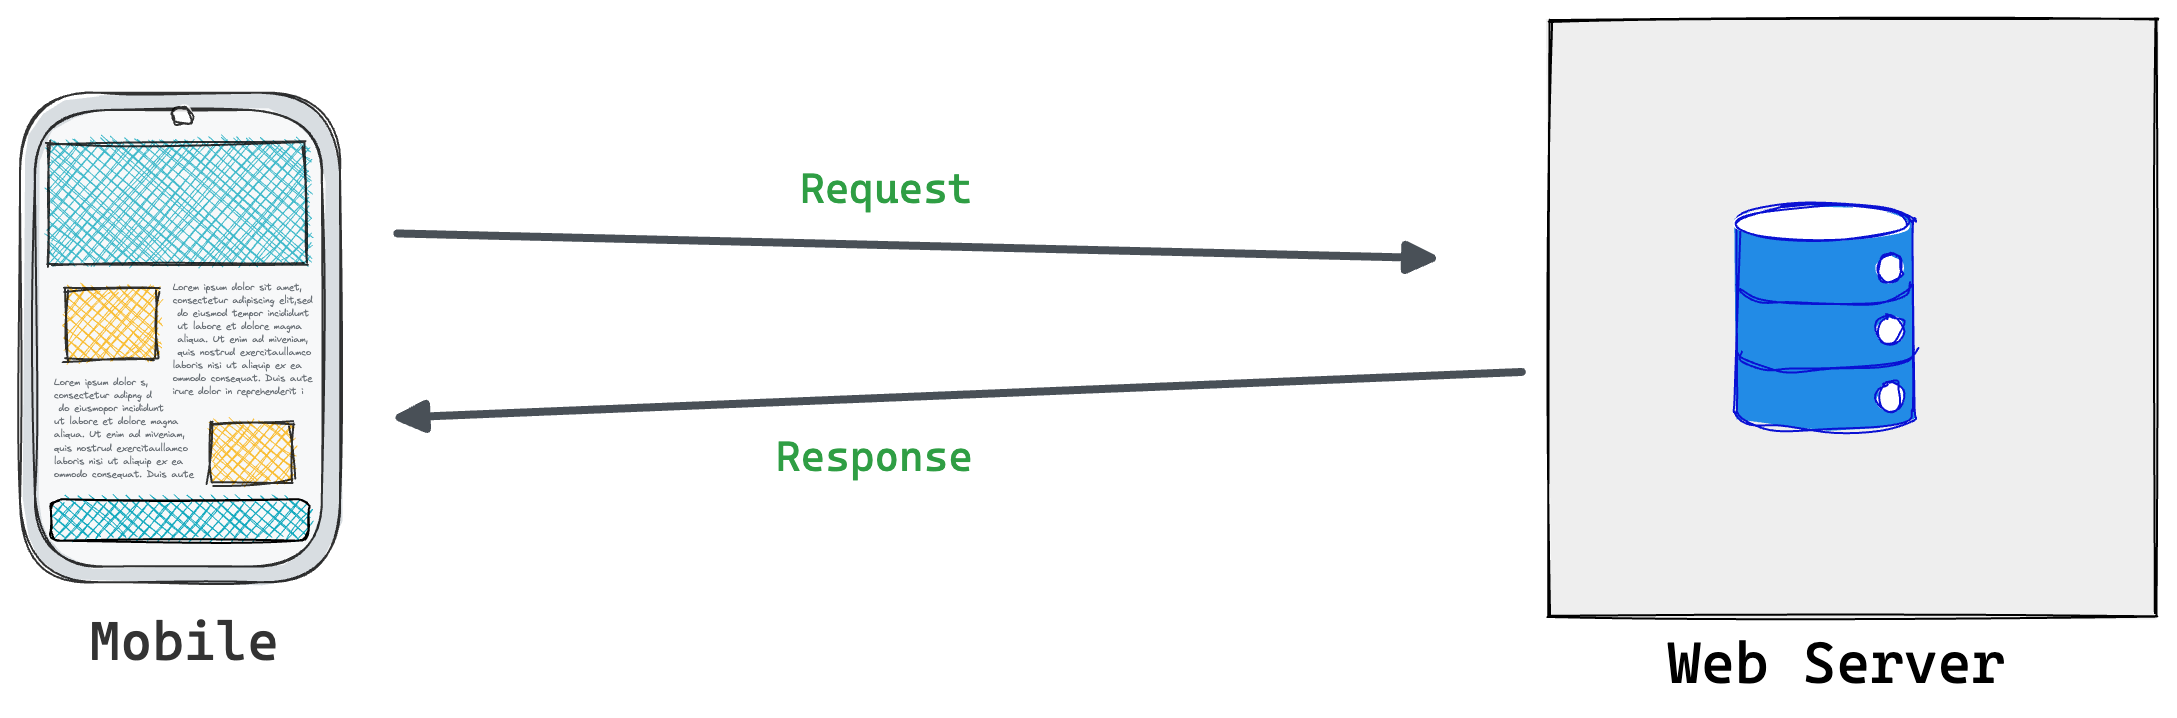 A basic request-response cycle